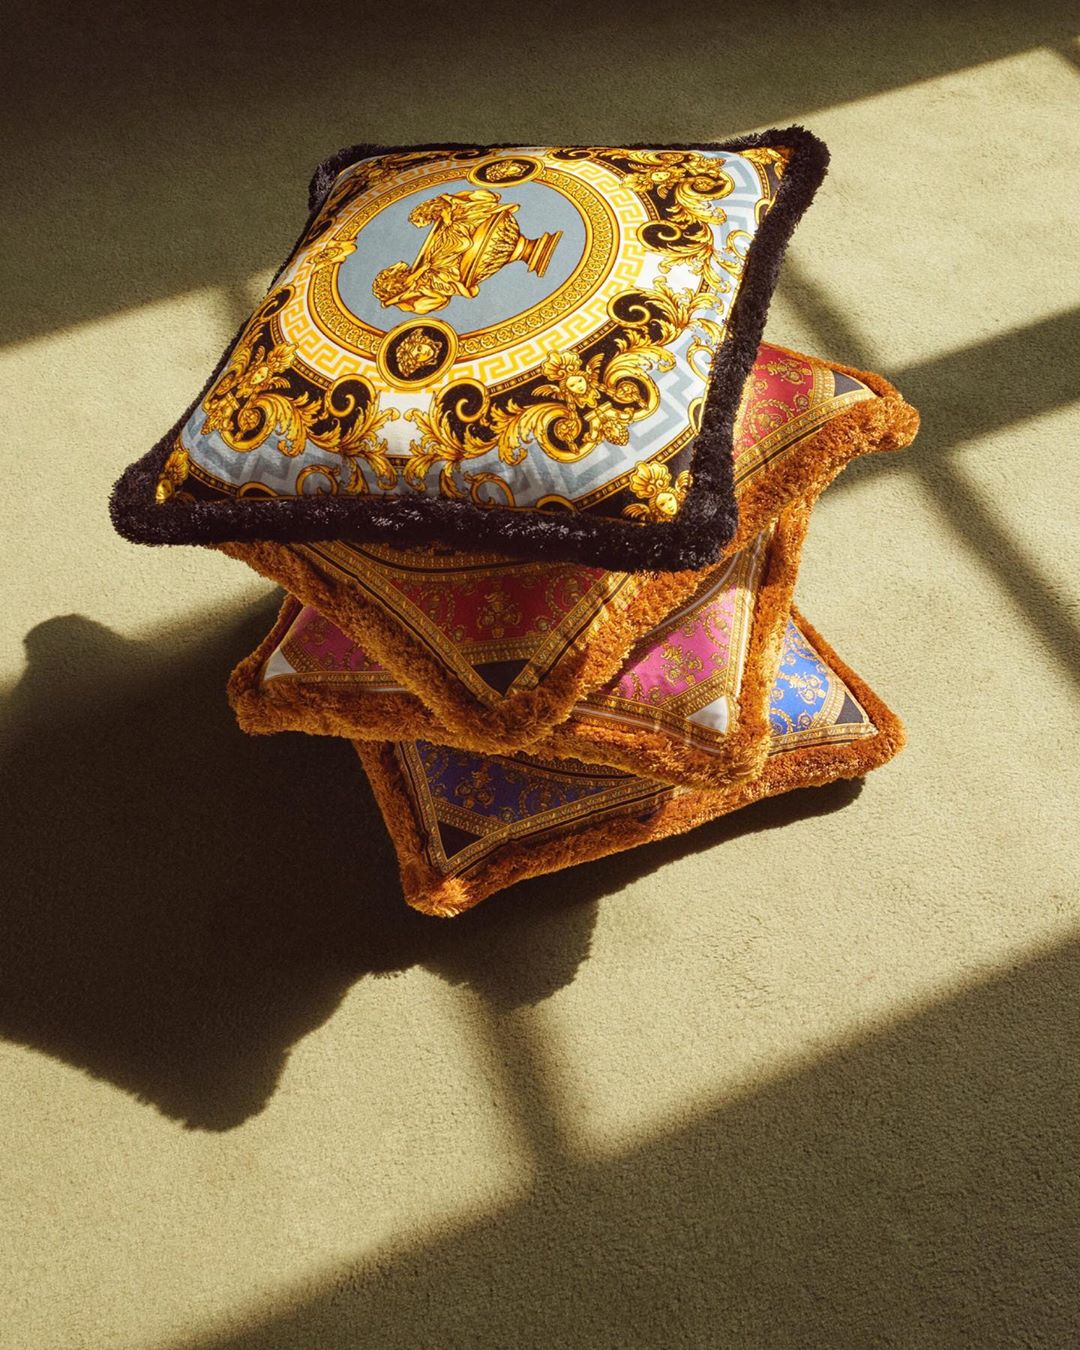 Versace - Make yourself #AtHomeWithVersace - the latest furnishings have arrived. Learn more through the link in bio. #VersaceHome